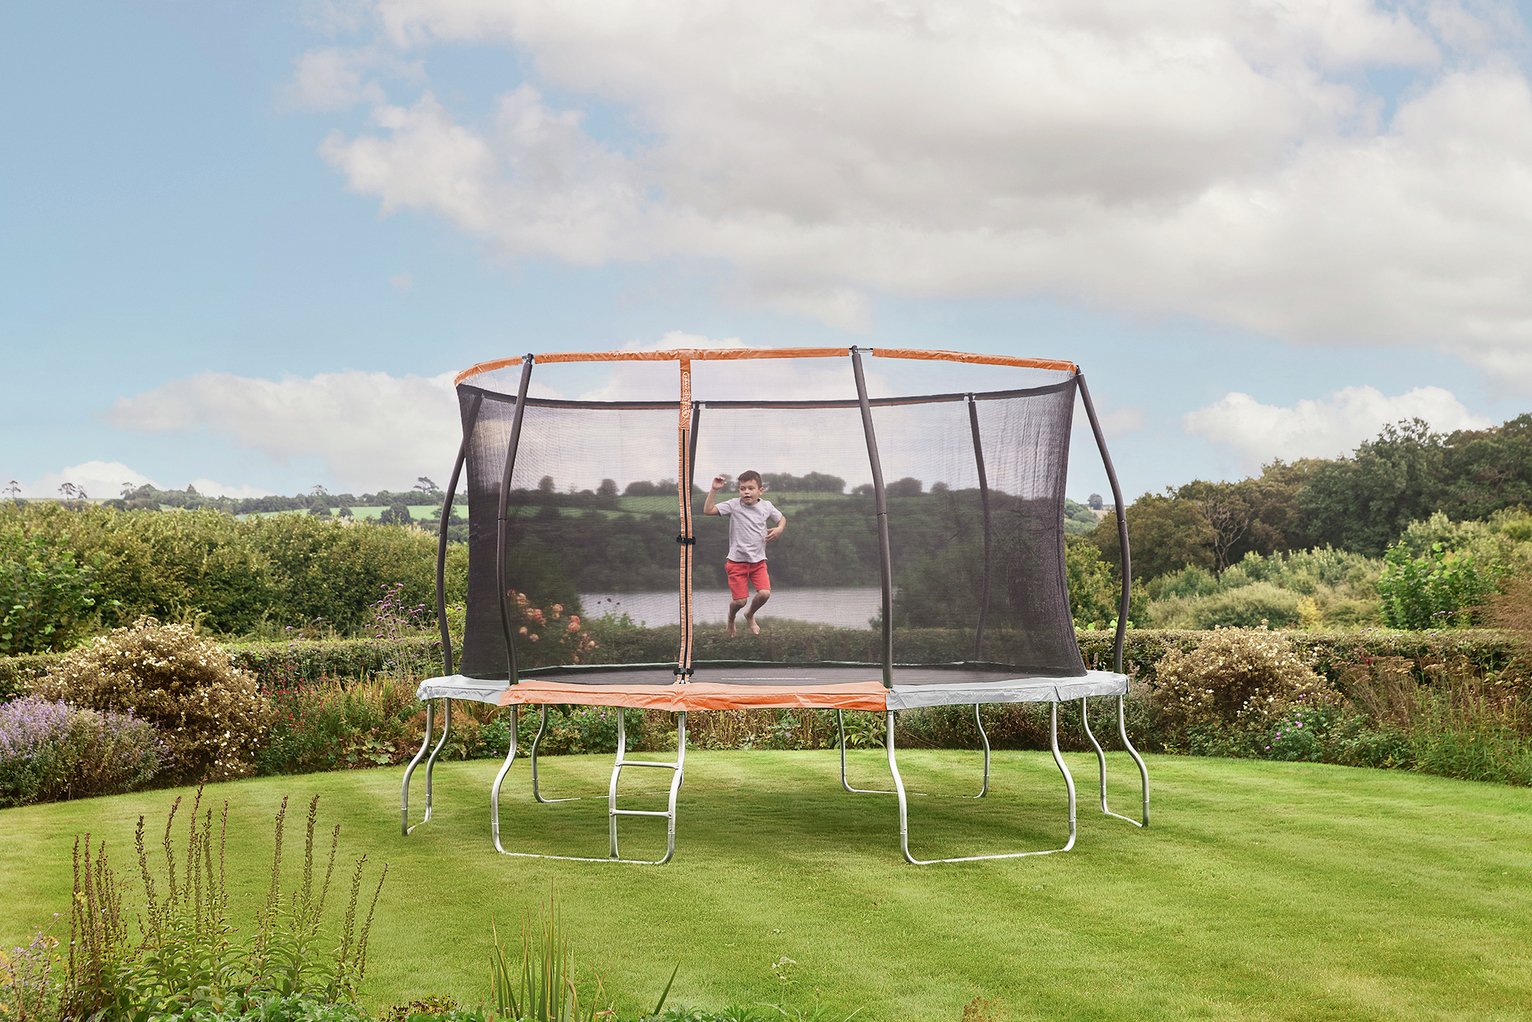 Sportspower 14ft Outdoor Kids Trampoline with Enclosure Review